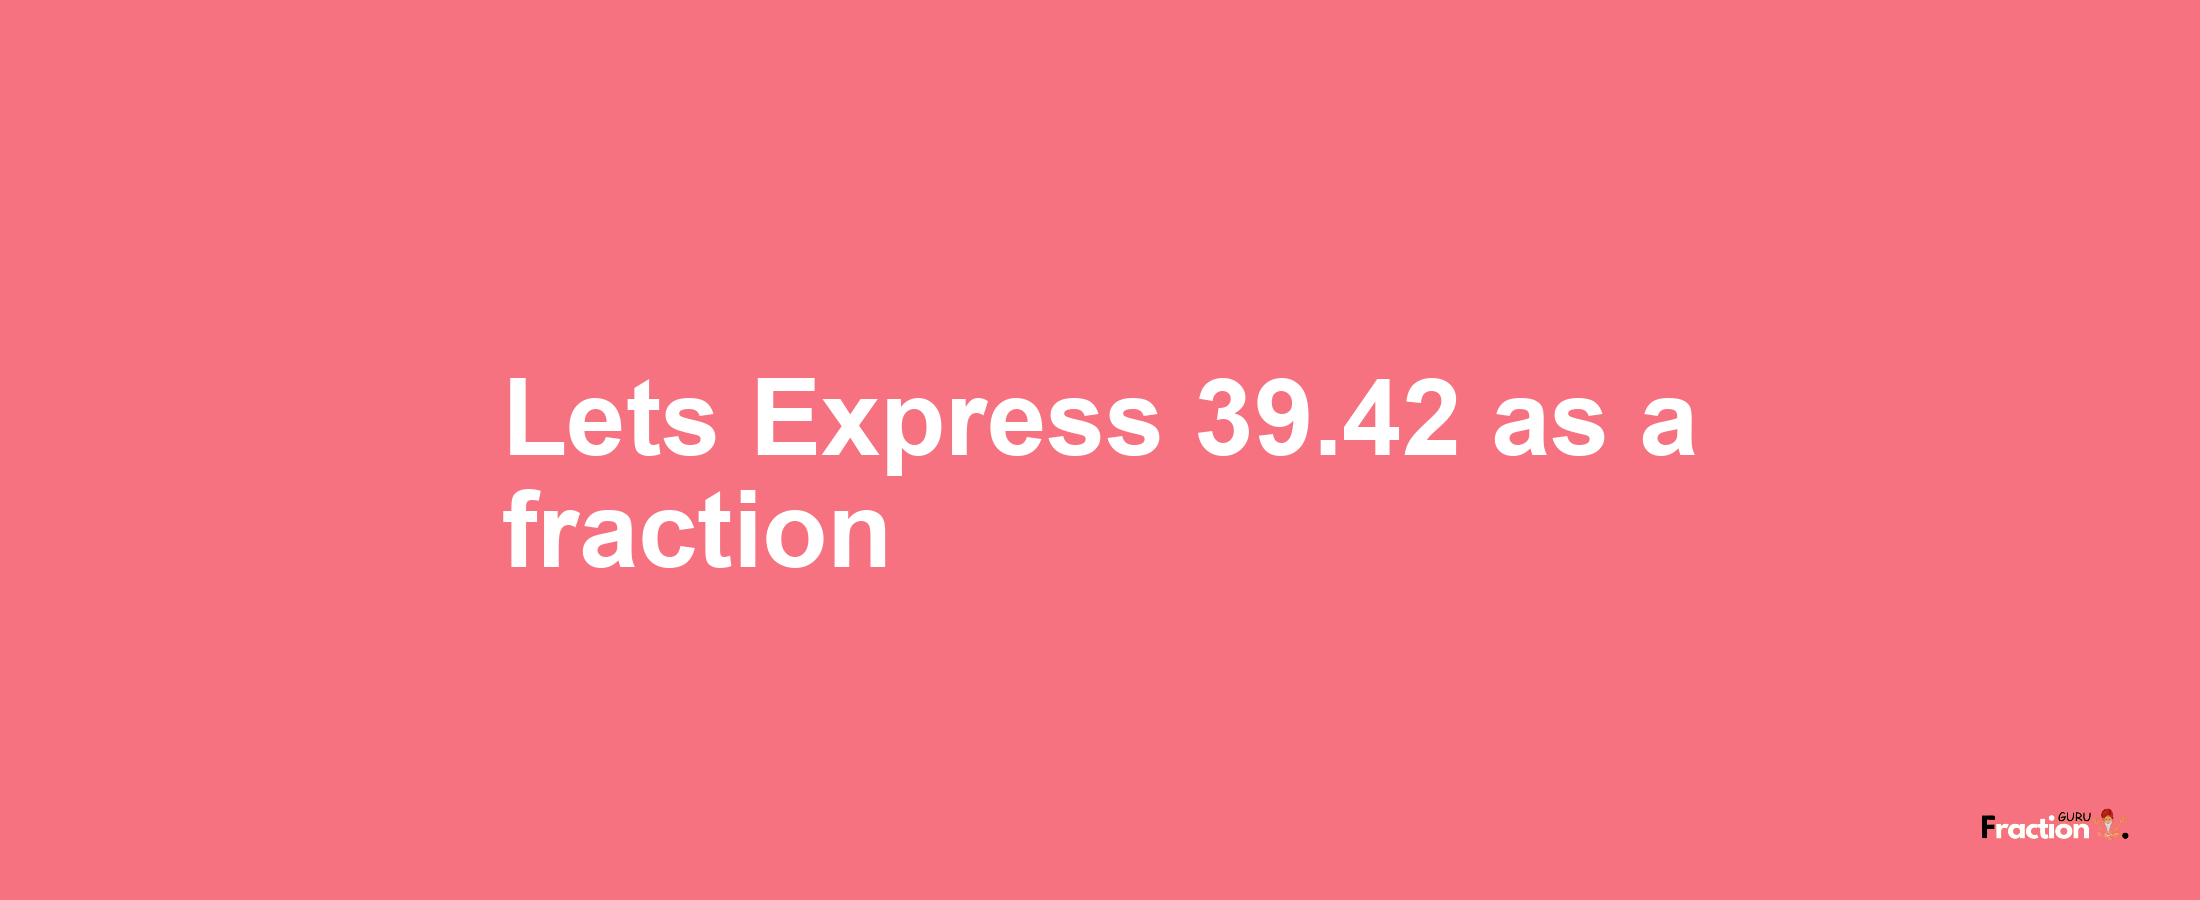 Lets Express 39.42 as afraction